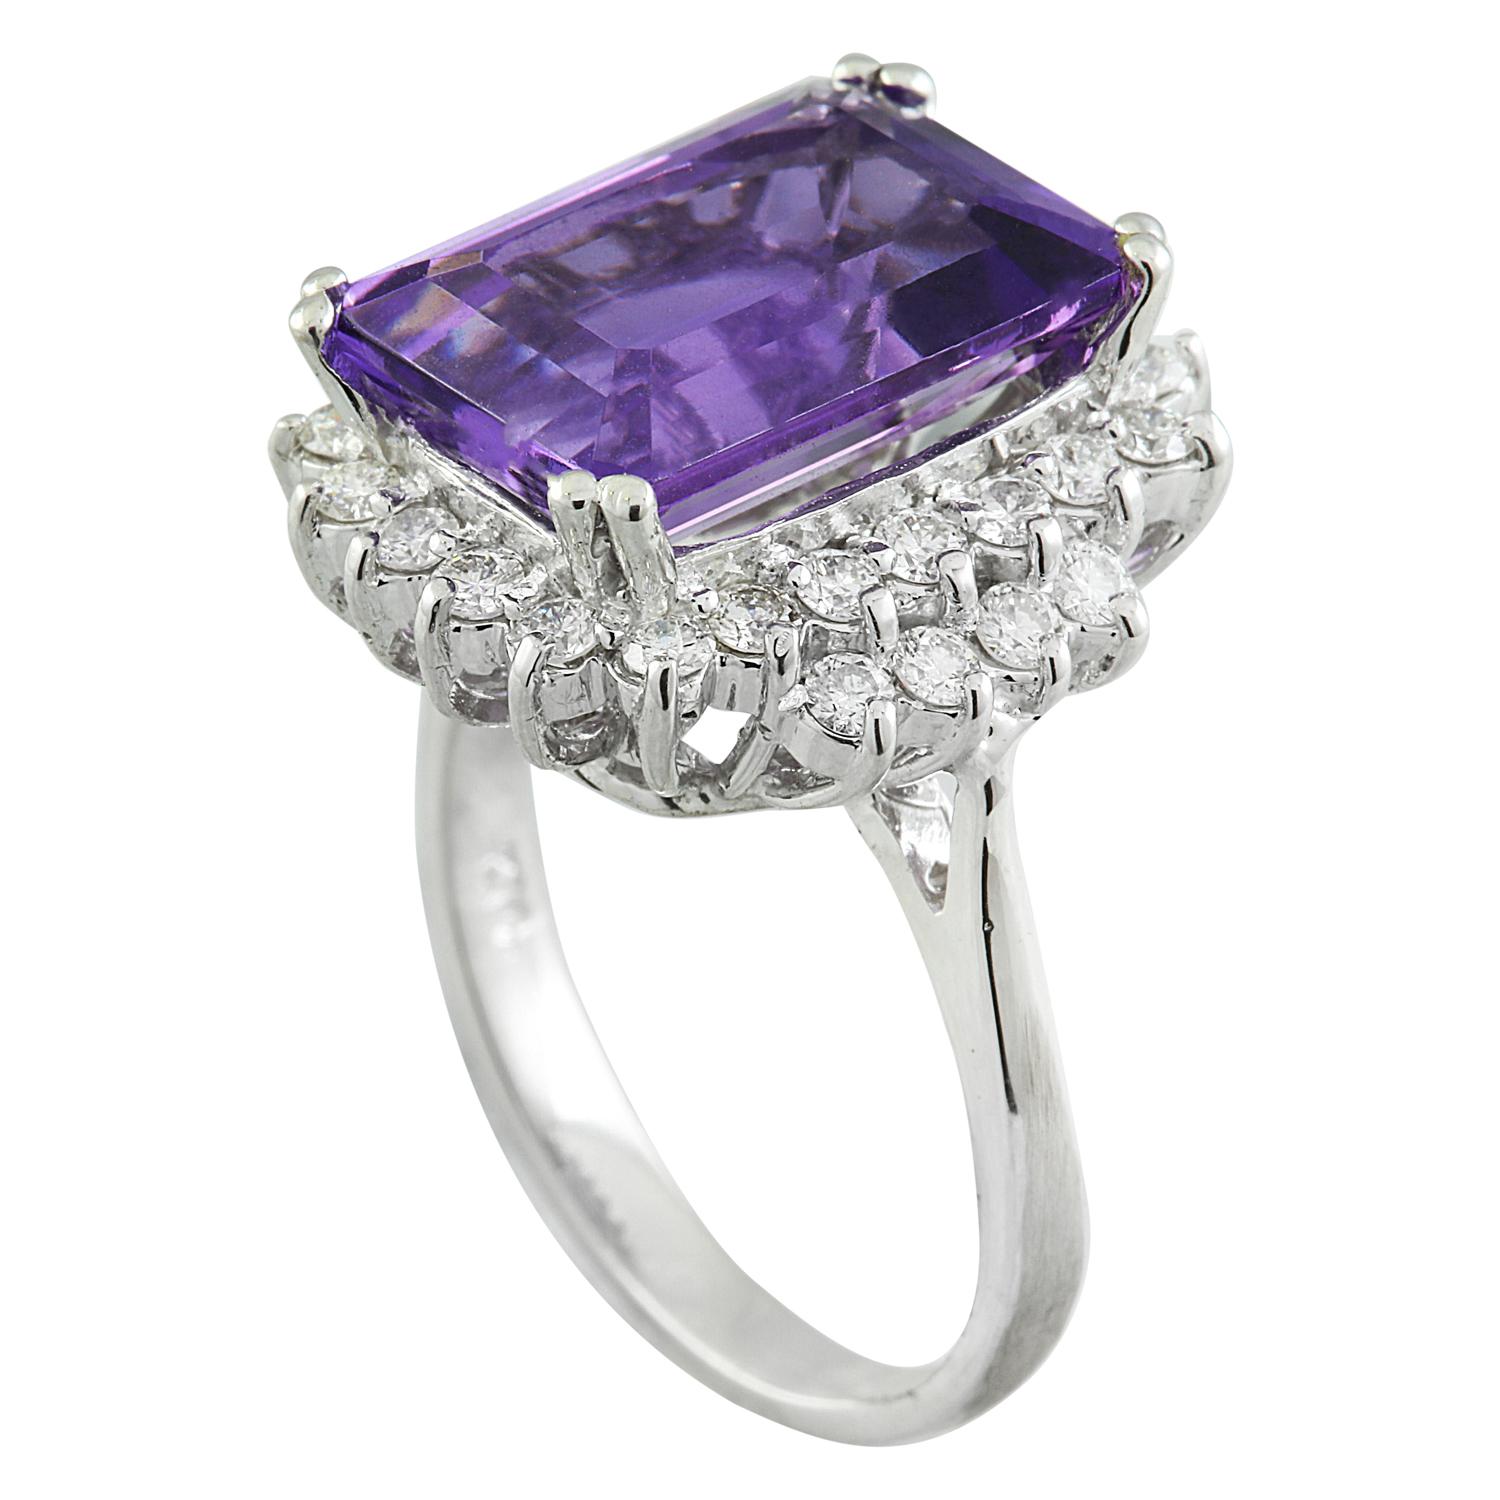 Emerald Cut Natural Amethyst Diamond Ring In 14 Karat White Gold For Sale